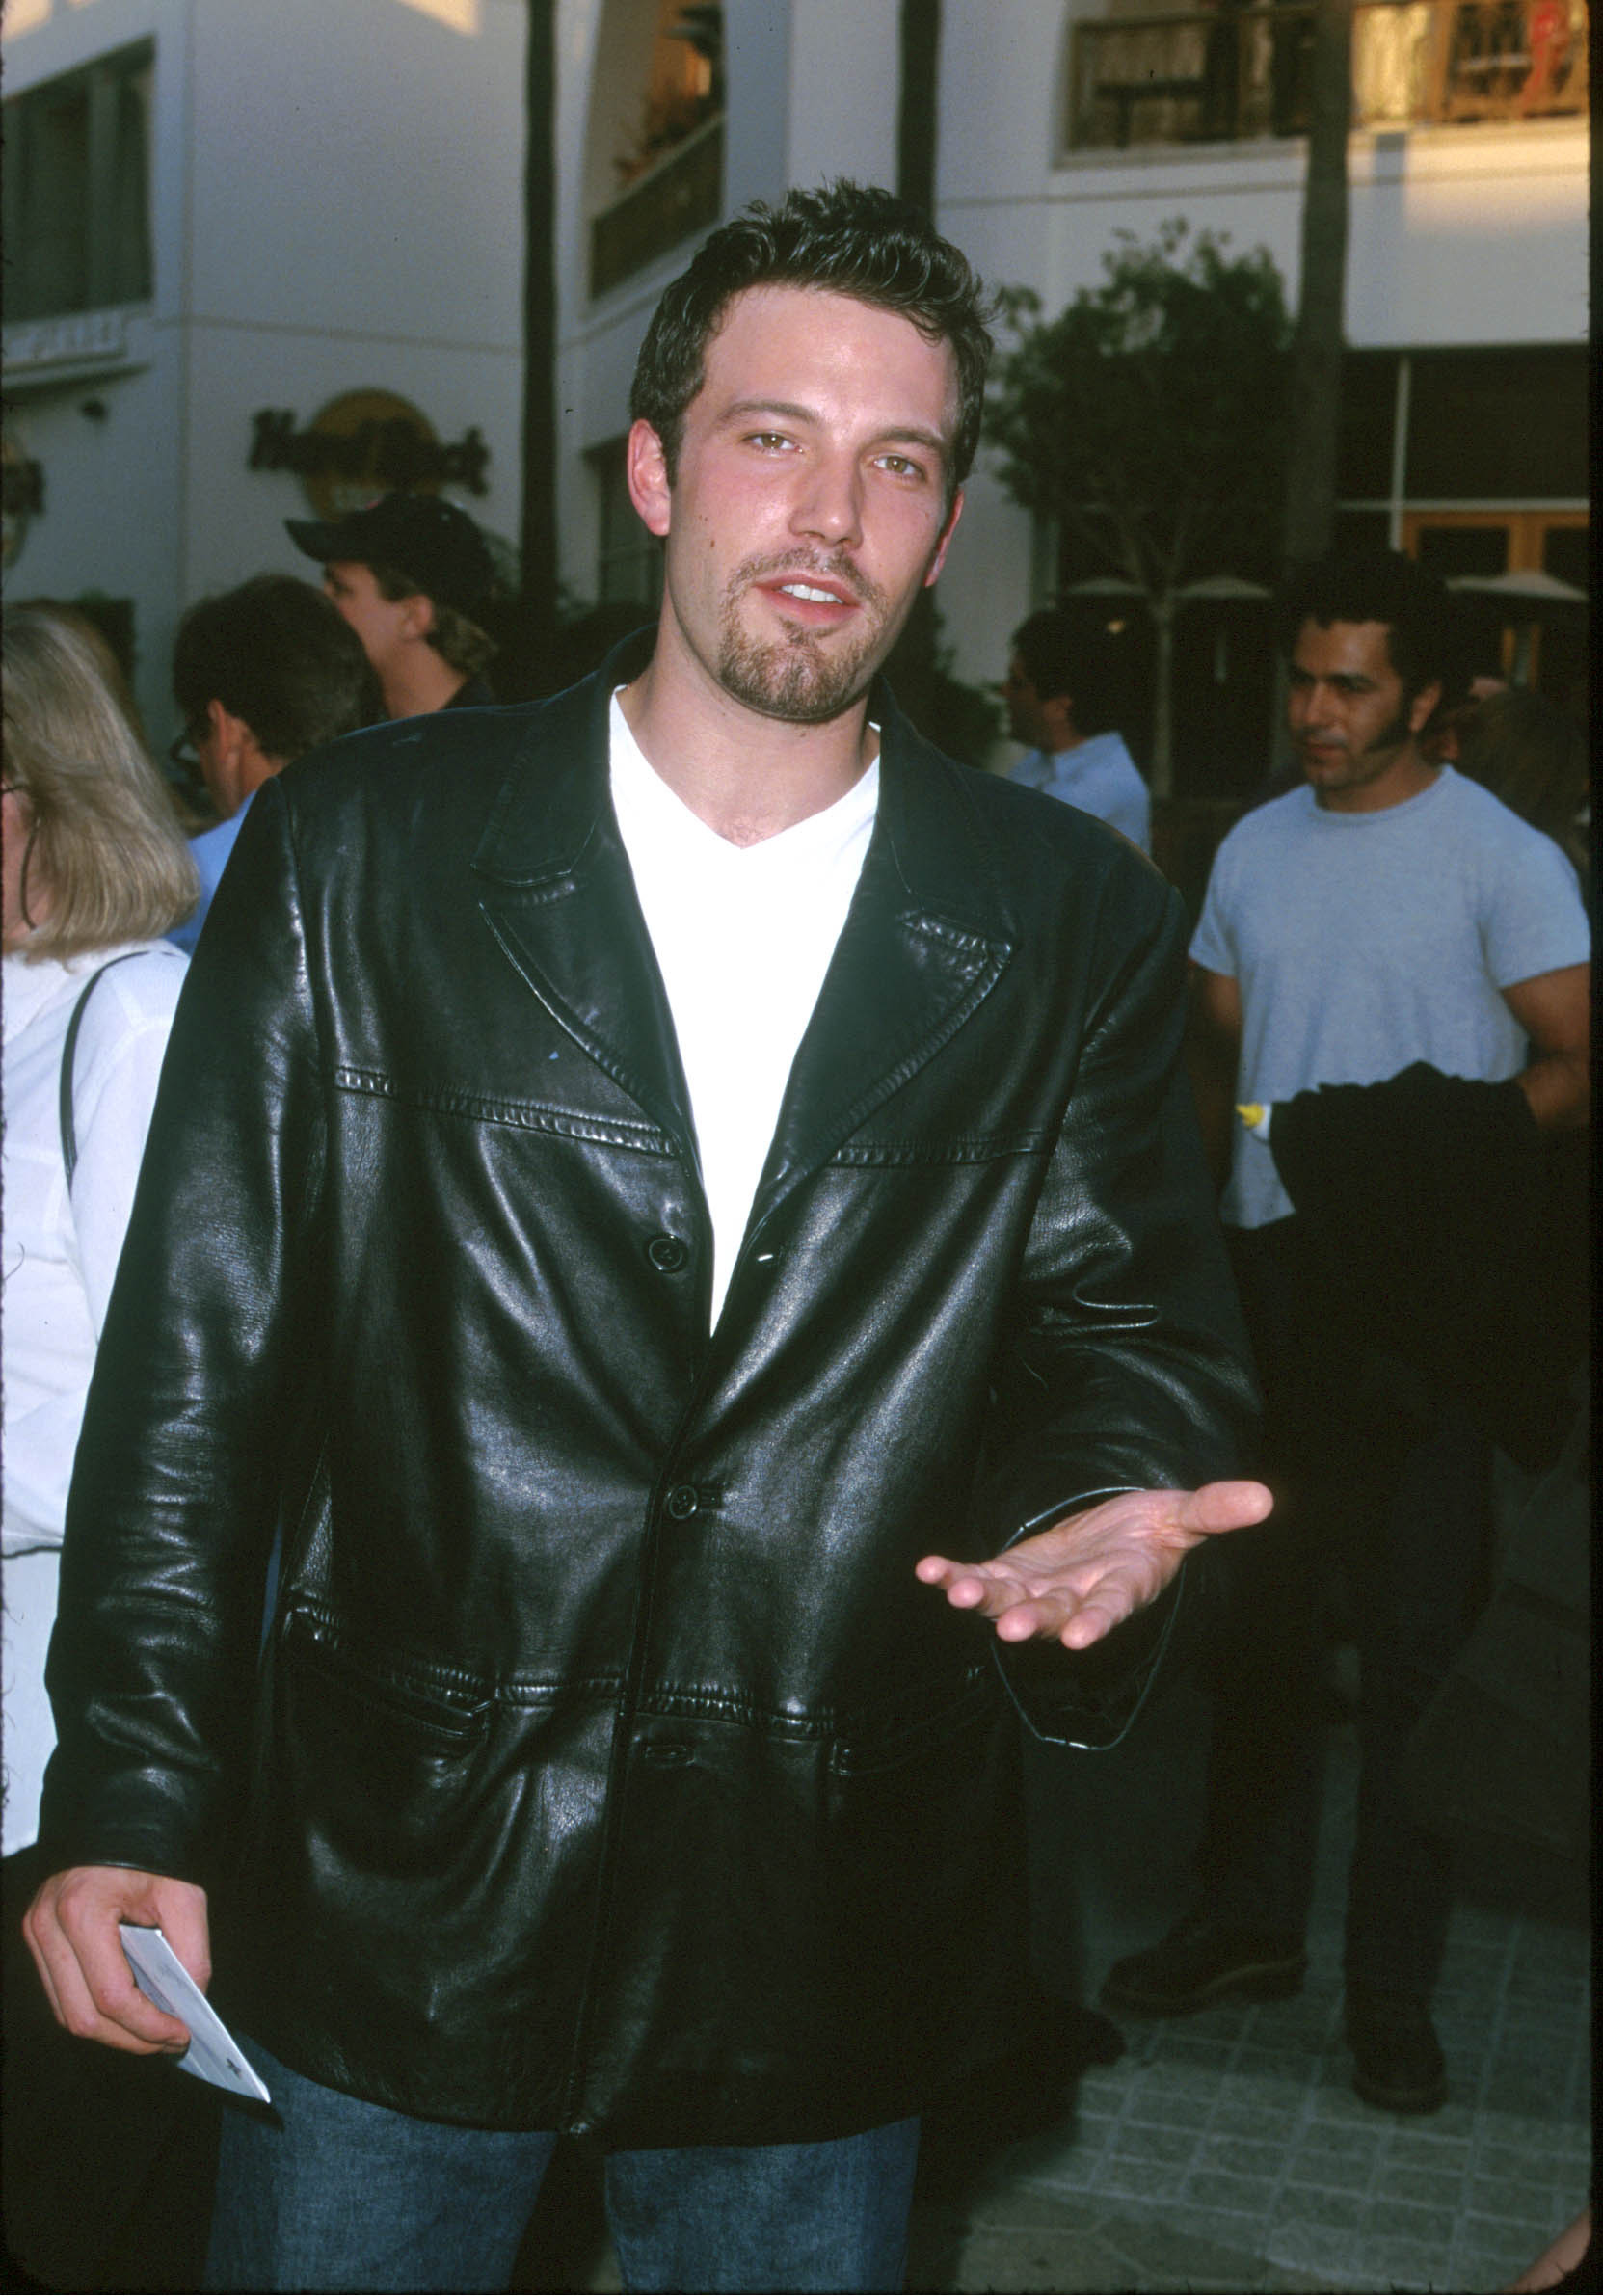 Ben Affleck at the "American Pie" West Coast Premiere at Cineplex Odeon Universal Studios Cinema in Universal City, California, United States | Source: Getty Images